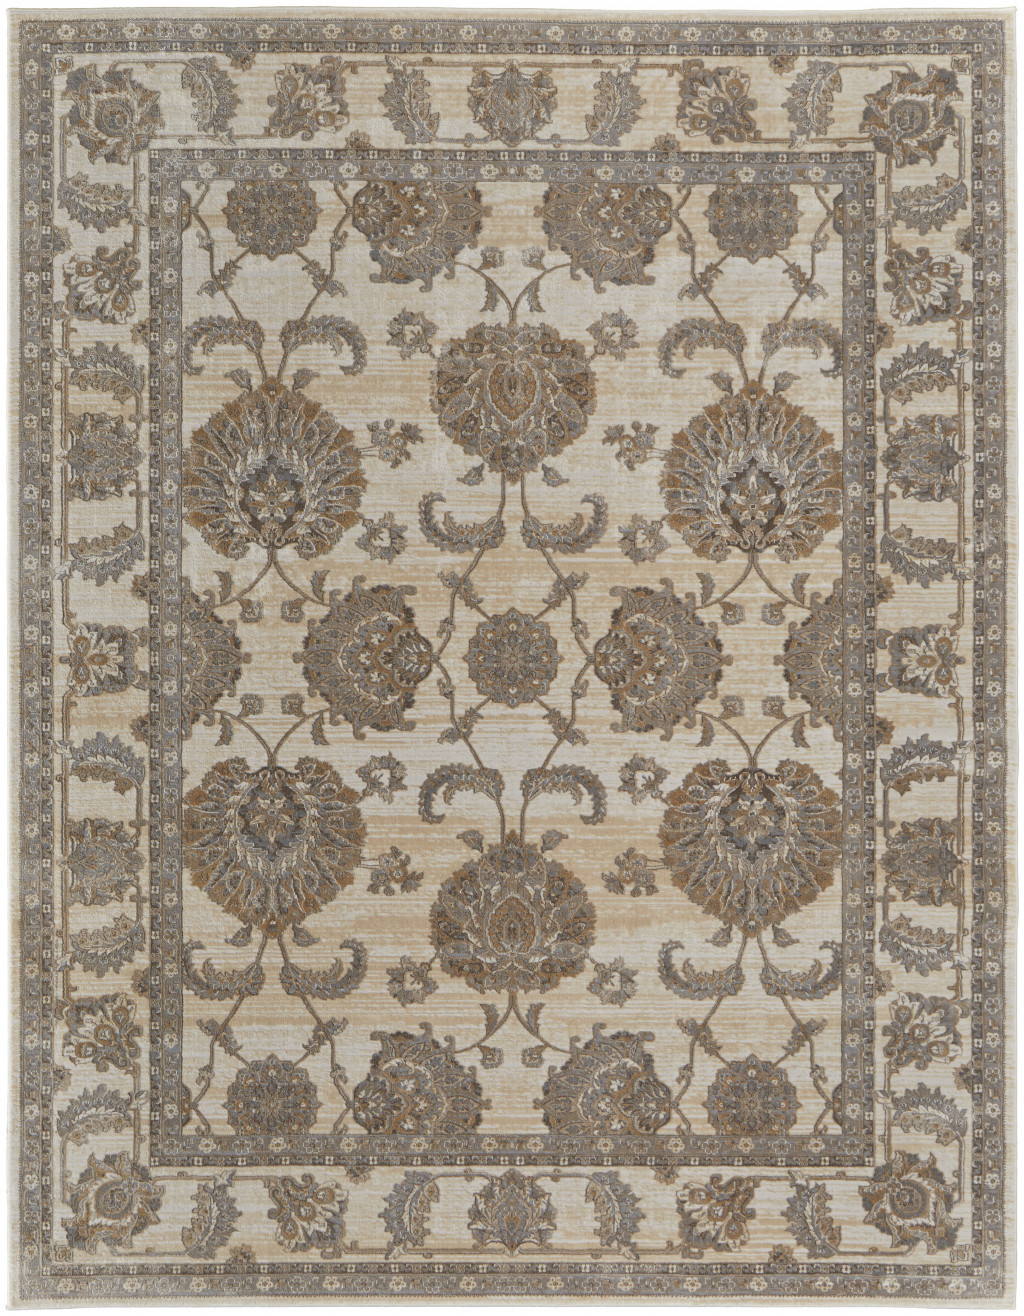 9' X 12' Tan Ivory And Brown Power Loom Area Rug-515038-1